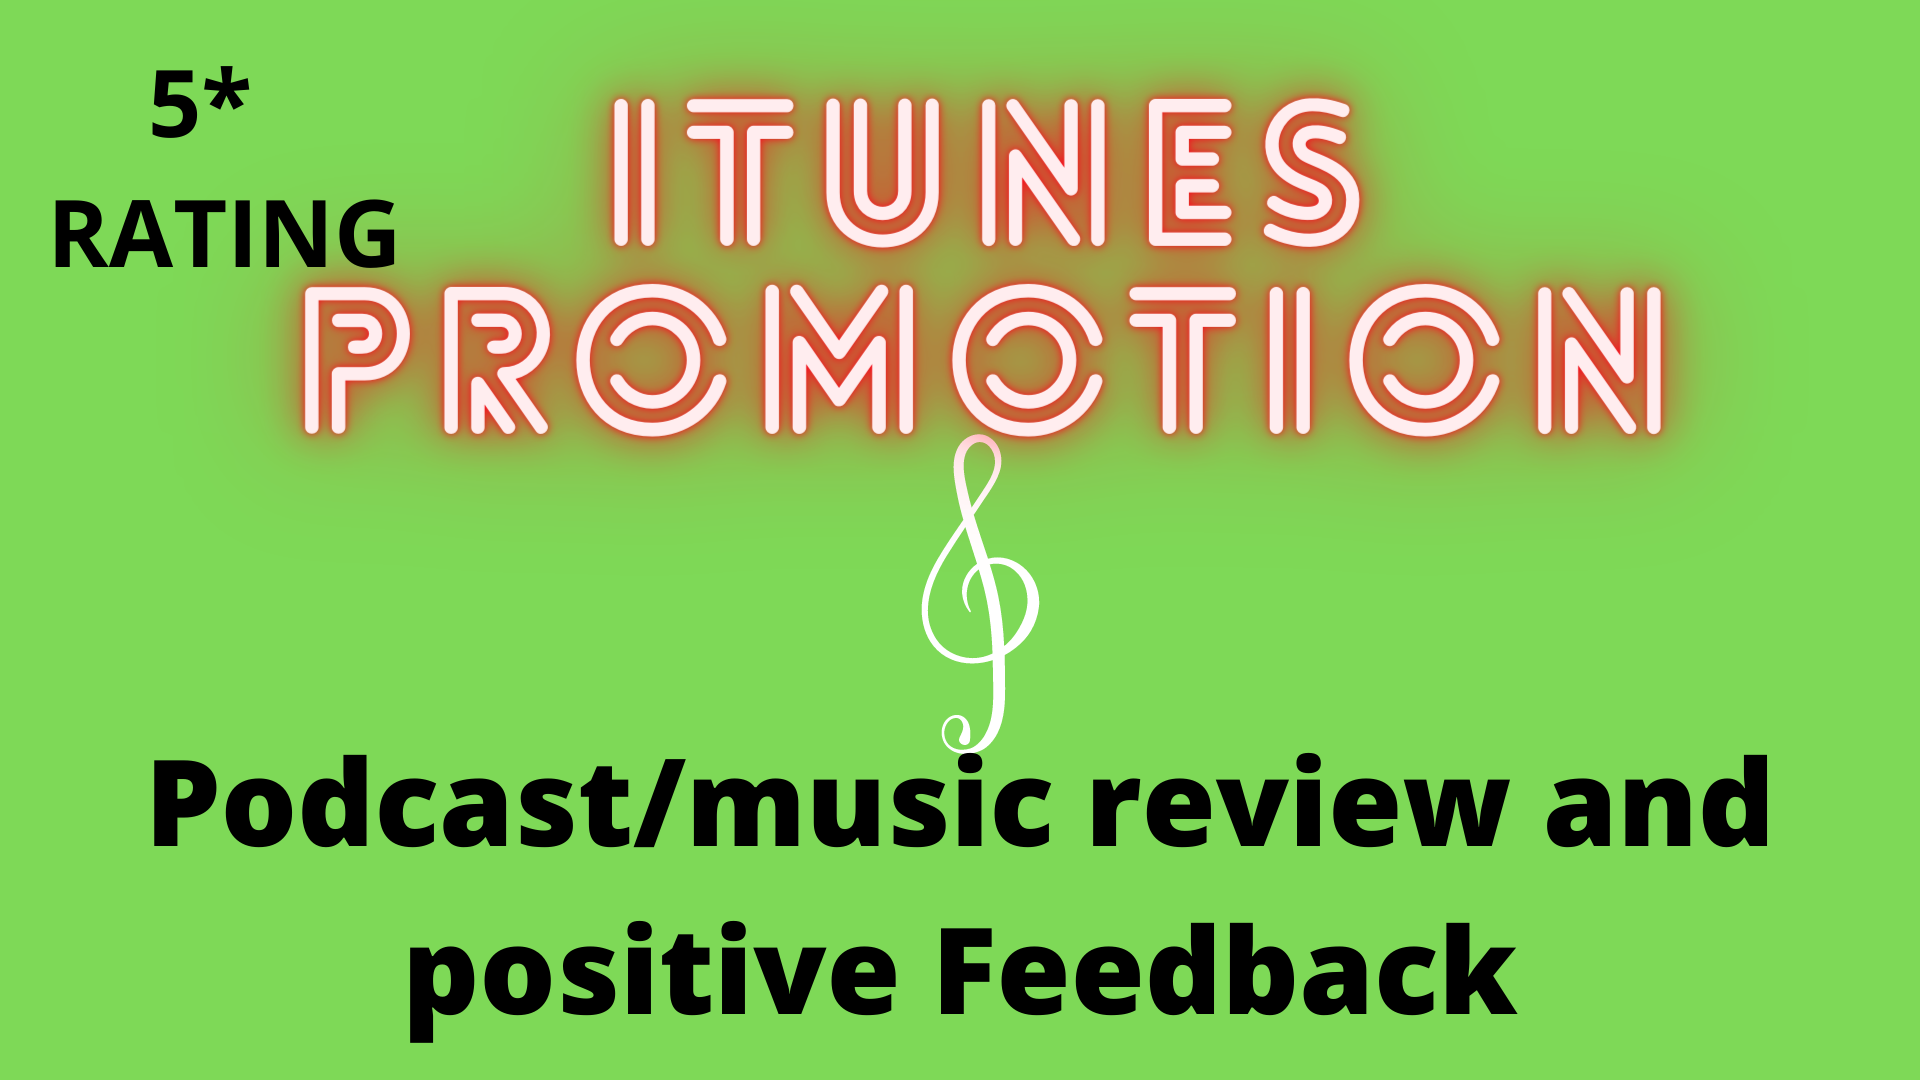 I will listen to your podcast on iTunes and give a positive feedback